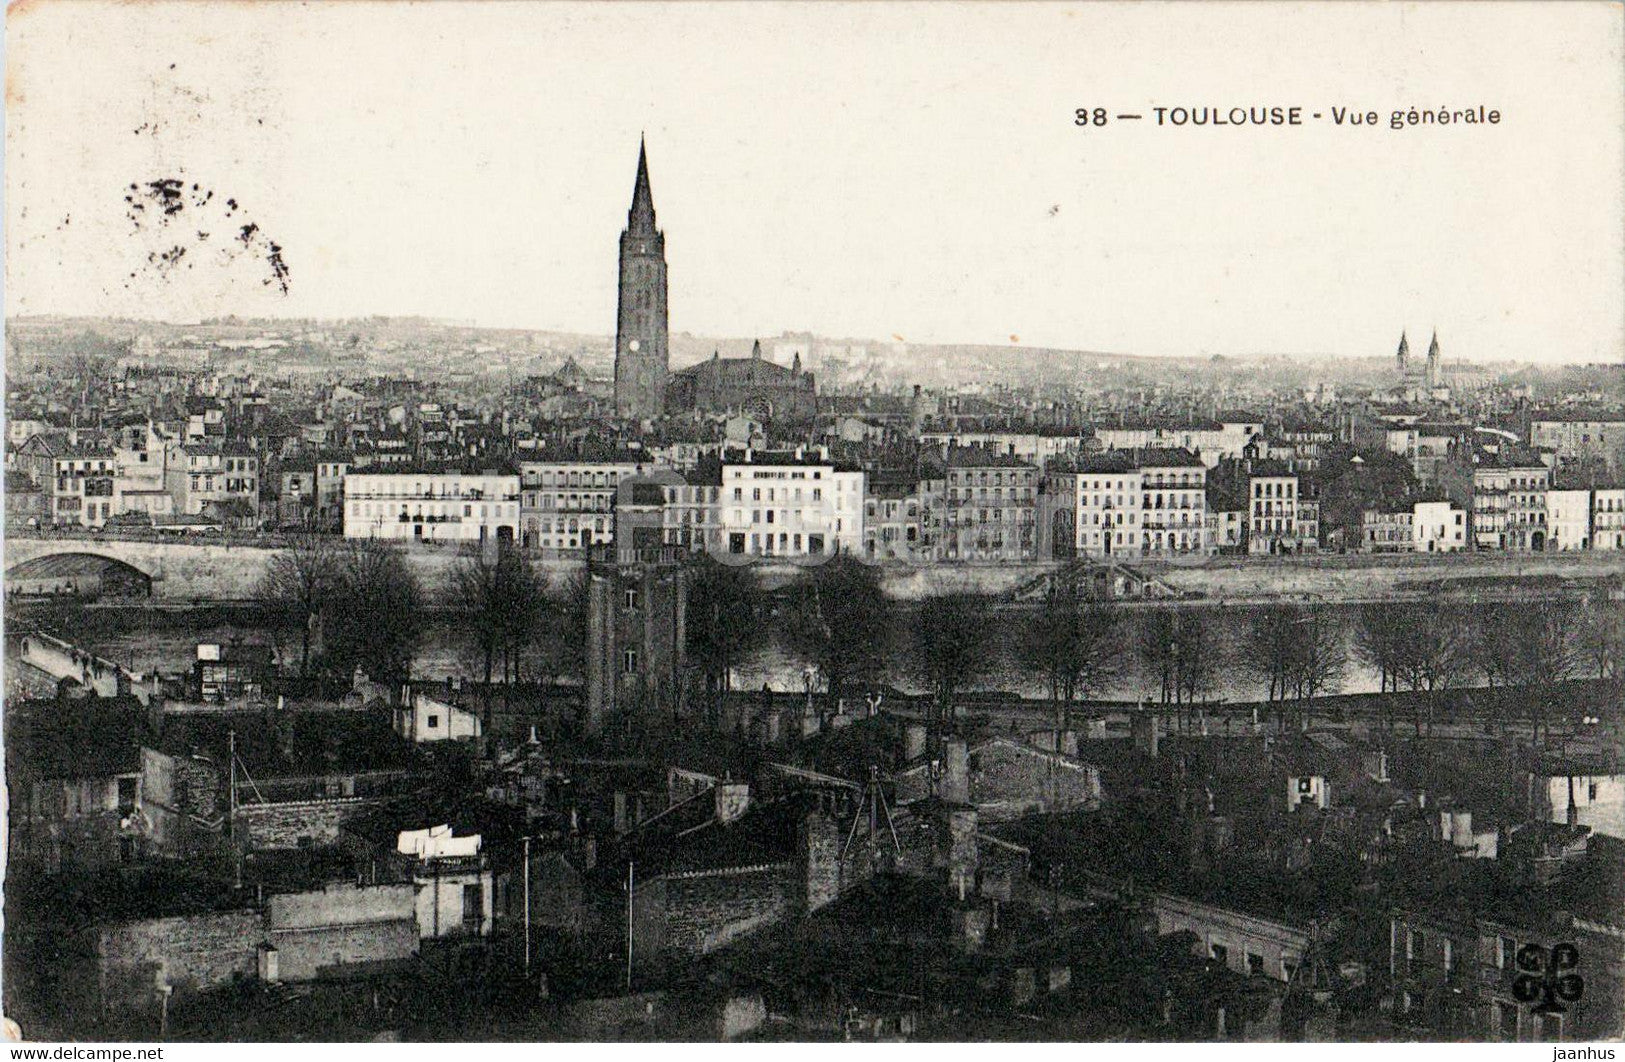 Toulouse - Vue Generale - 38 - old postcard - 1909 - France - used - JH Postcards